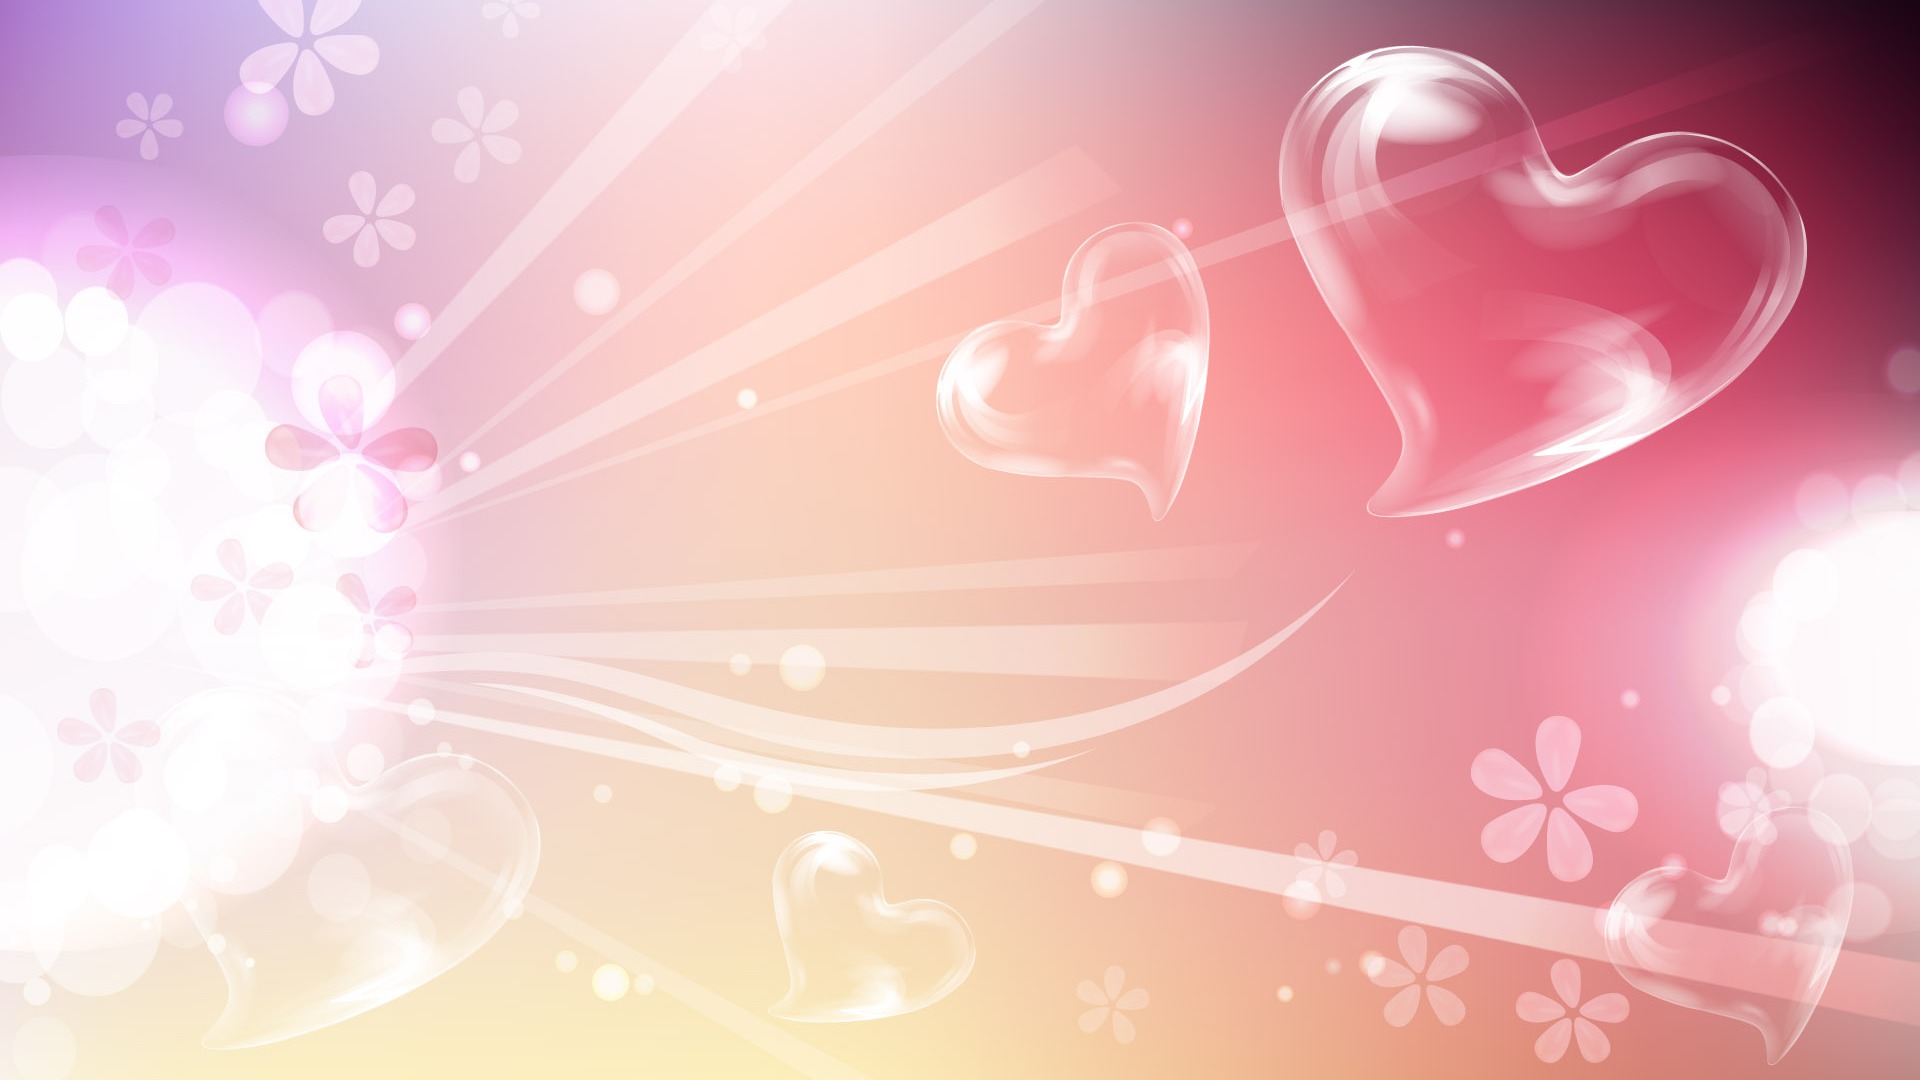 Valentine's Day Love Theme Wallpapers (2) #3 - 1920x1080